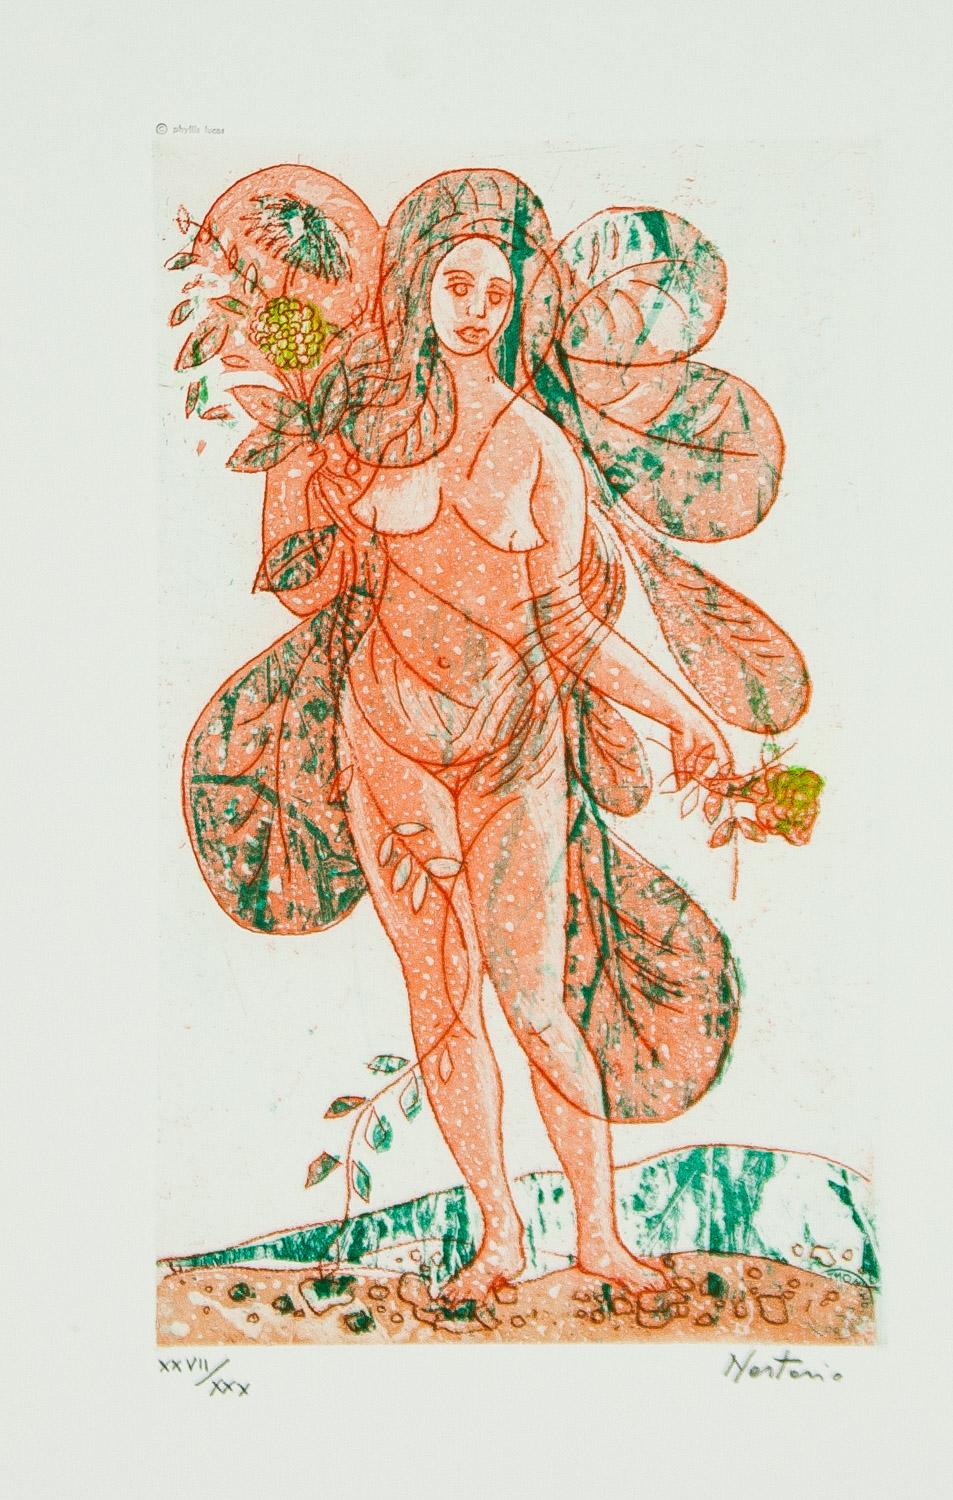 Leaves of Love-Orange Lady lithograph by Alessandro Nastasio